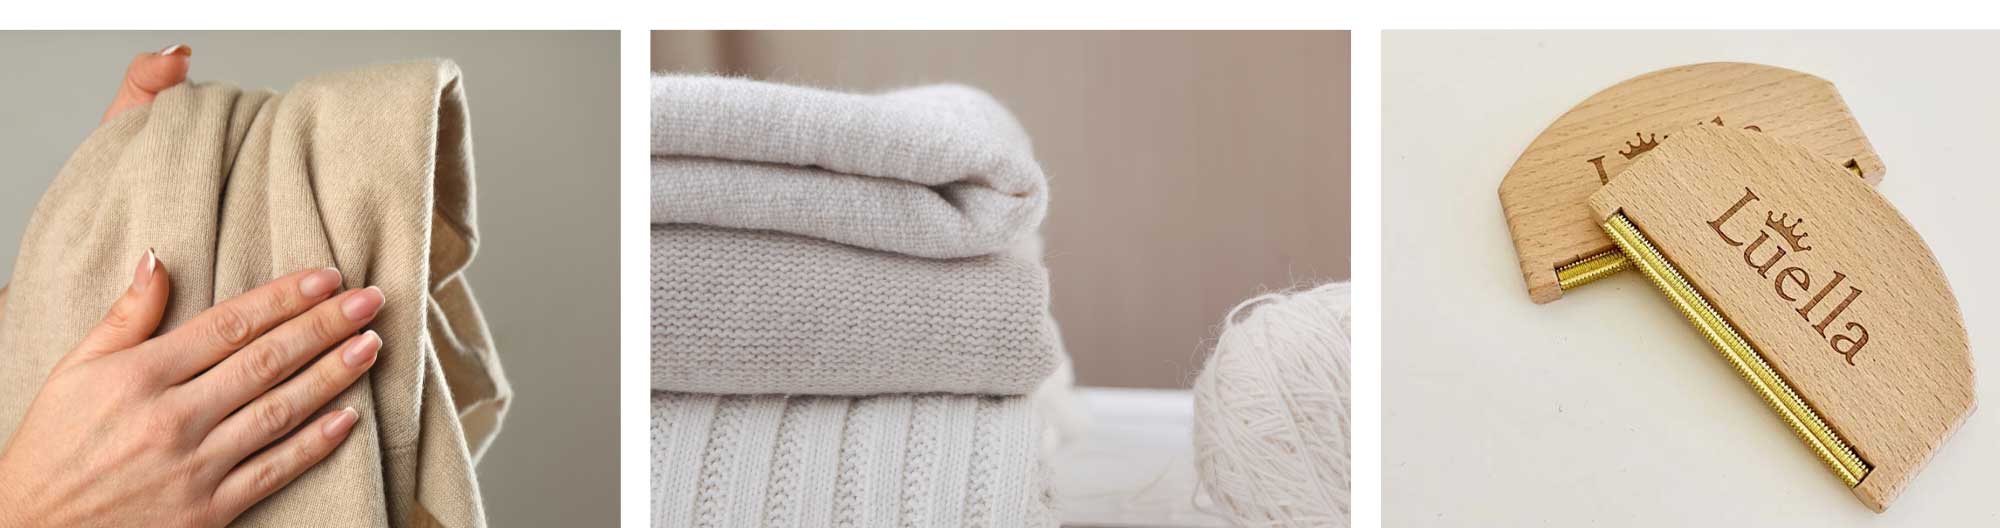 Cashmere care guide – Everything you need to know